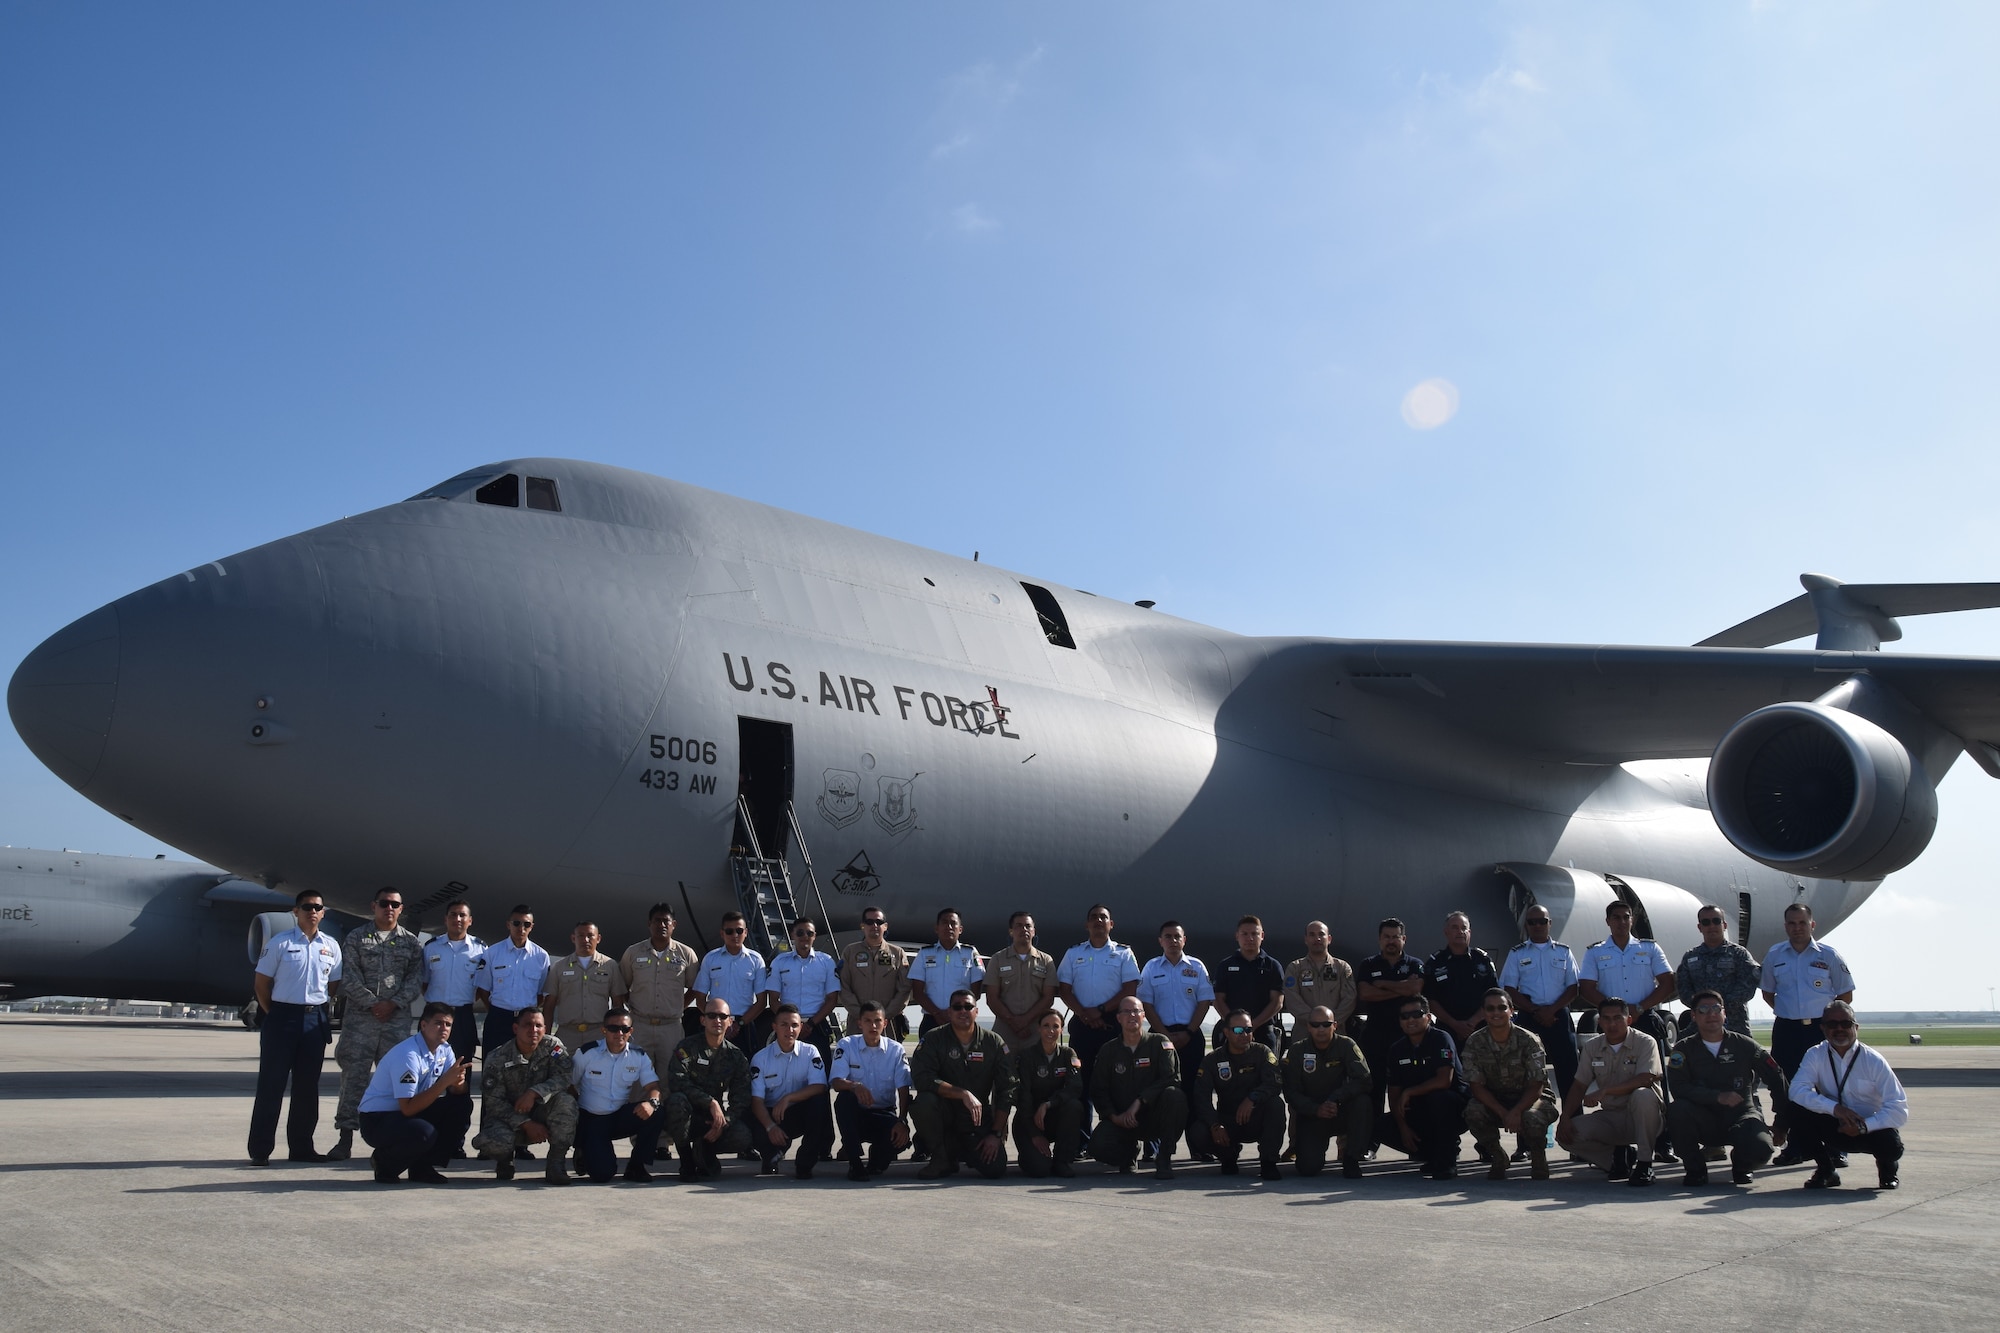 IAAFA continues decades old tradition with “Alamo Wing” visit